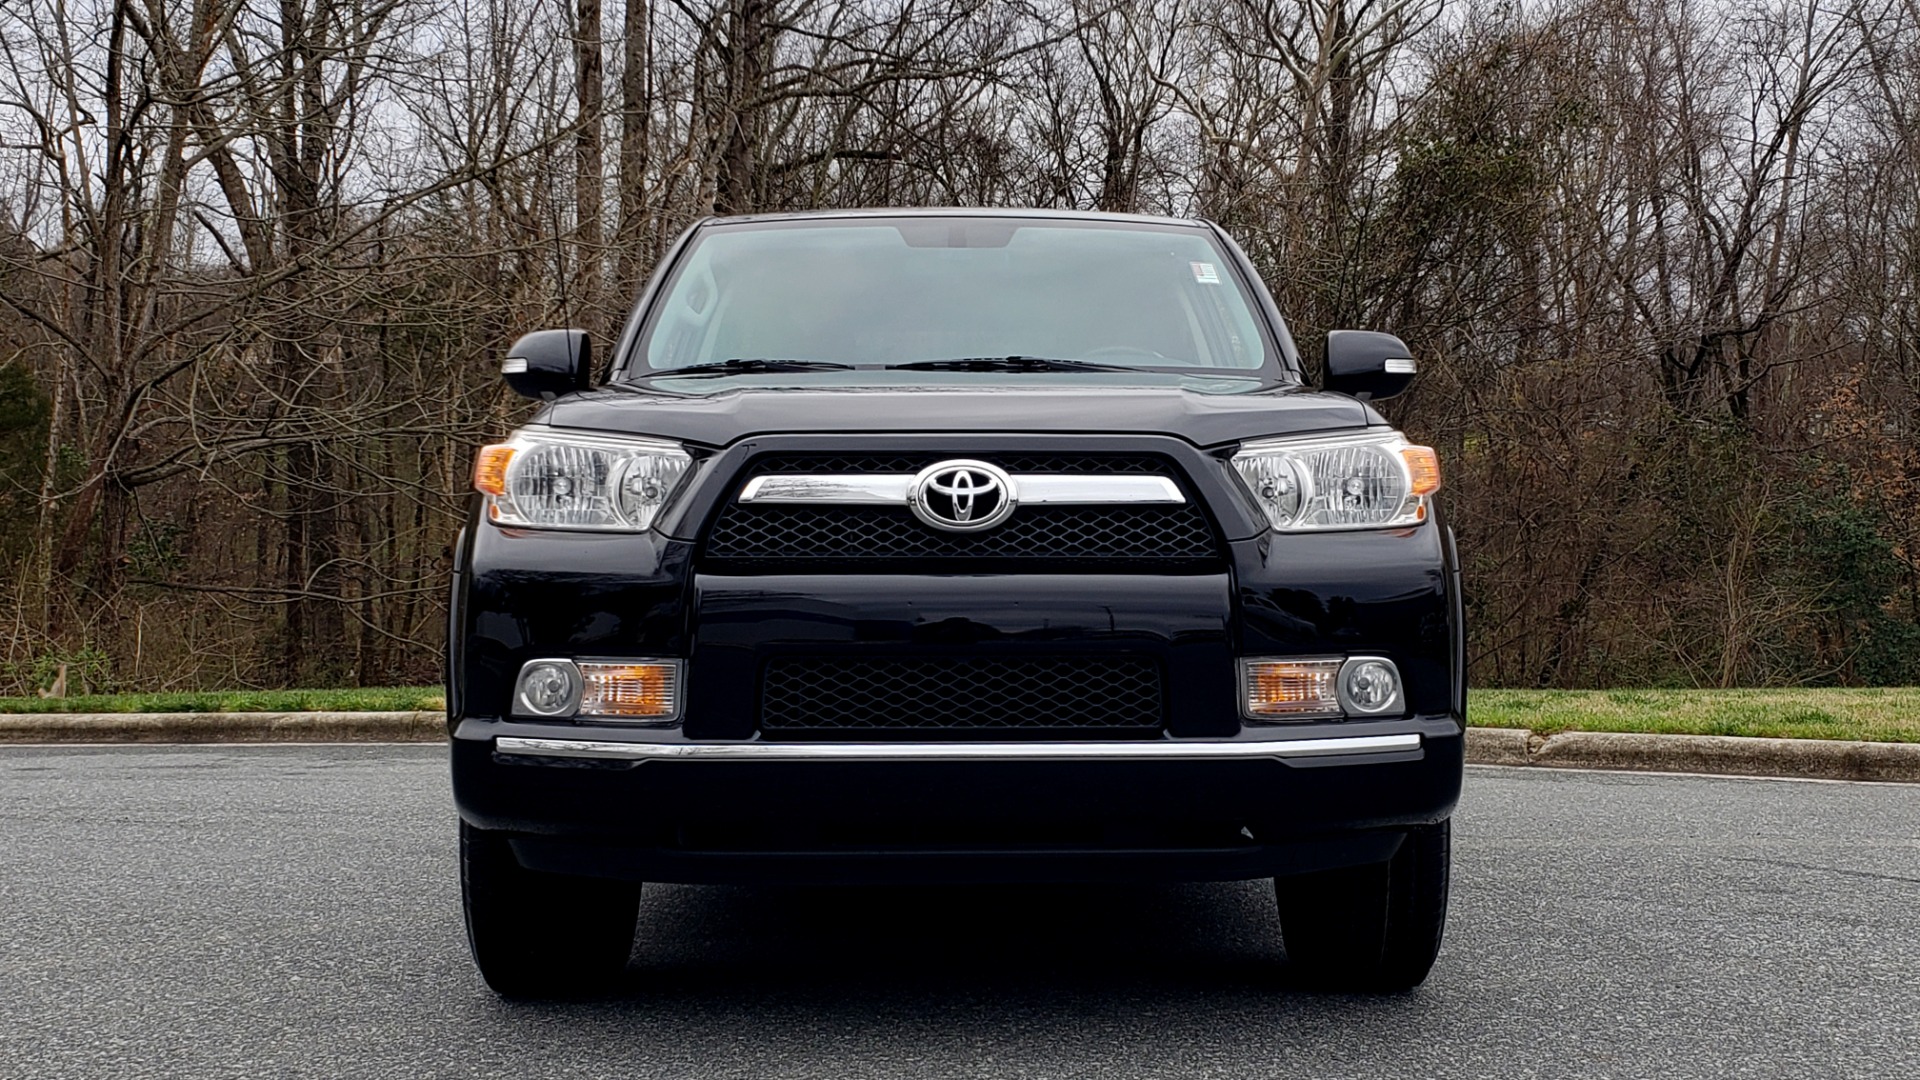 Used 2011 Toyota 4RUNNER SR5 2WD / 5-SPD AUTO / 4.0L V6 / SAT RADIO / PWR STS for sale Sold at Formula Imports in Charlotte NC 28227 18